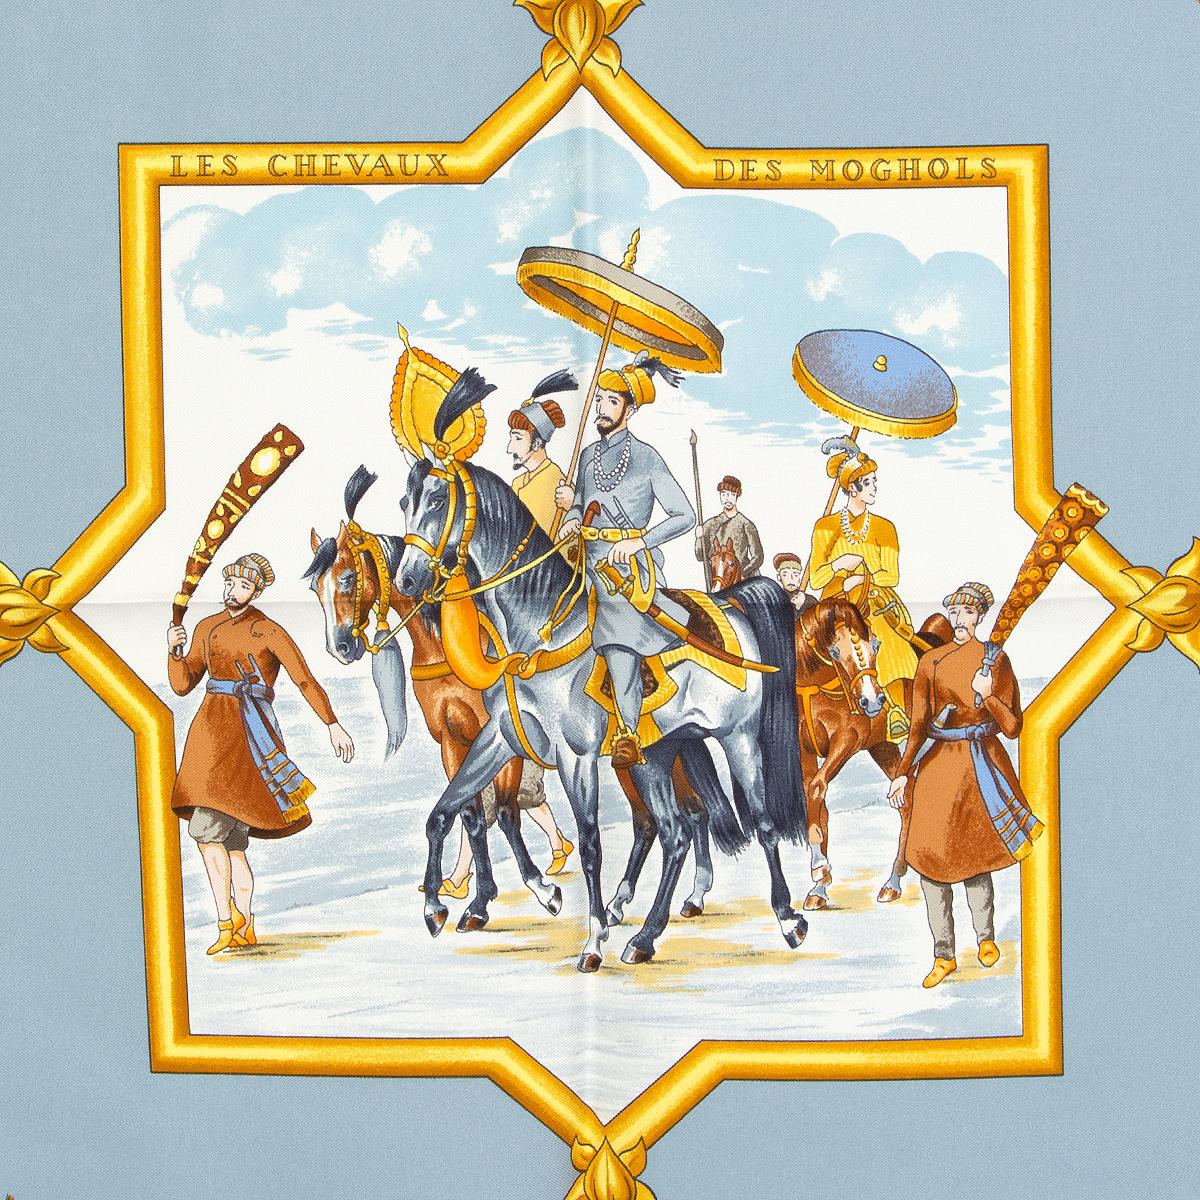 Hermes 'Les Chevaux des Moghols 90' scarf by Jean de Fougerolle in light blue silk twill (100%) with details in gold and shades of brown. Brand new.

Width 90cm (35.1in)
Height 90cm (35.1in)